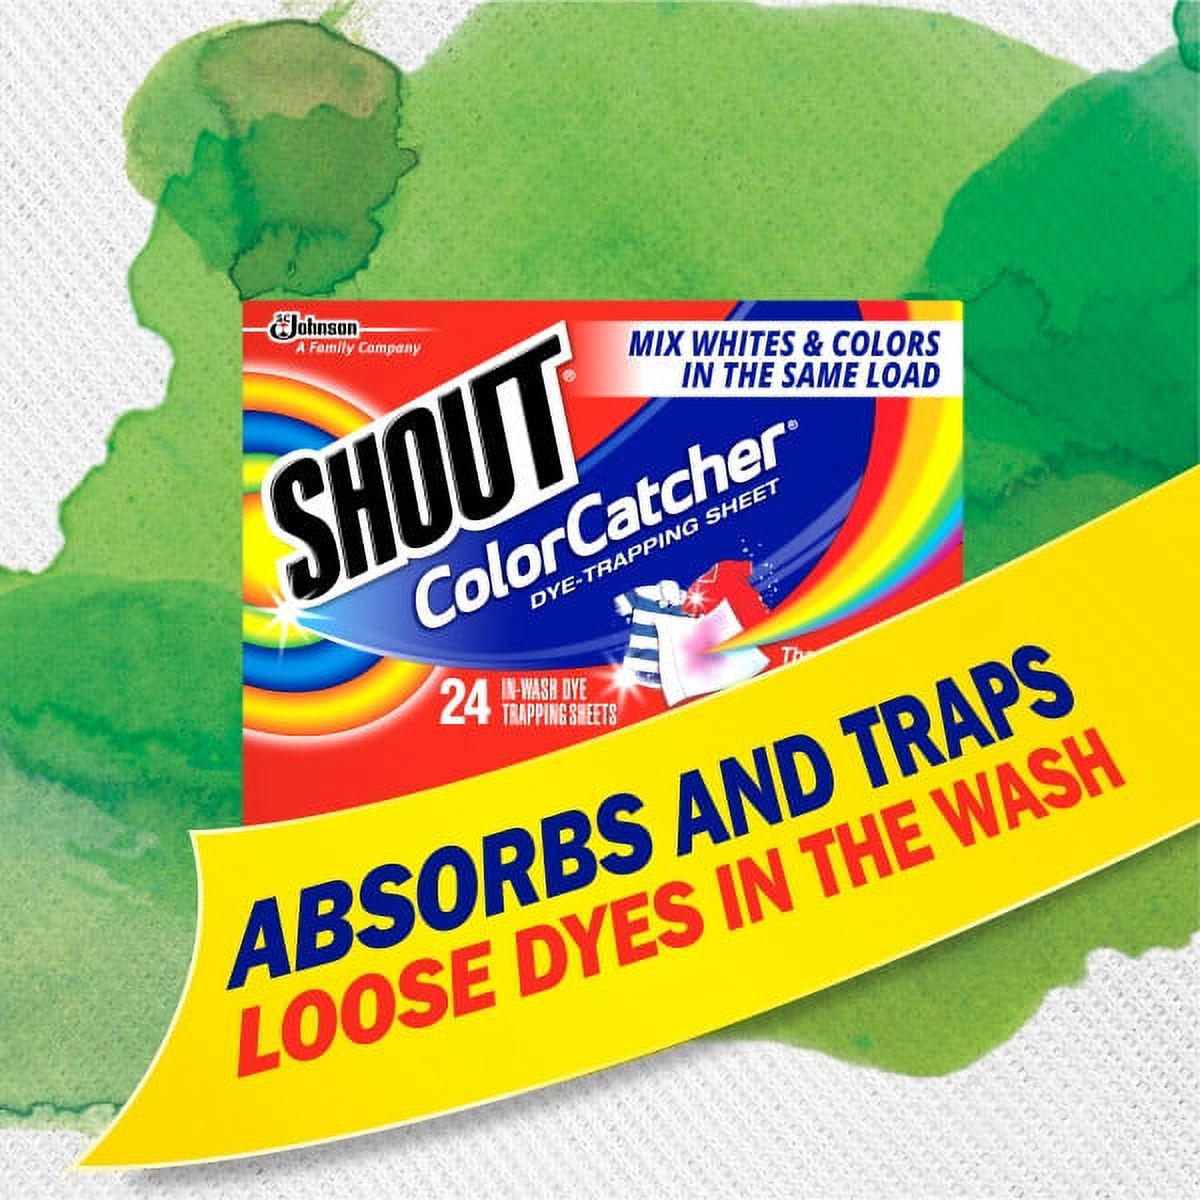 Shout Color Catcher, Dye-Trapping Sheets, 24 Sheets, Pack of 2 